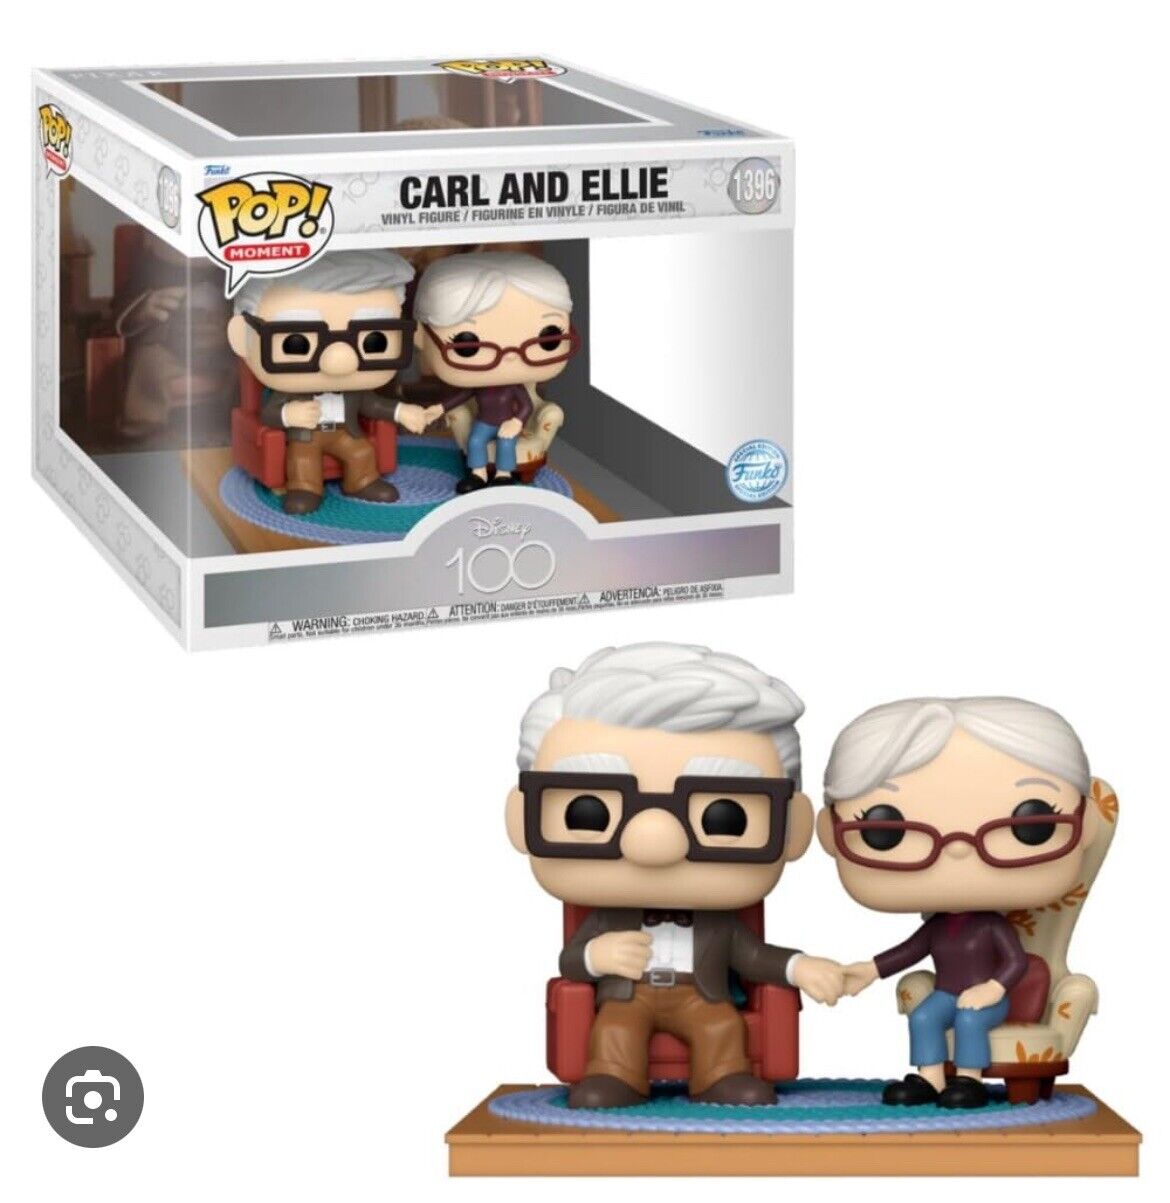 Funko POP DISNEY 100 MOMENT UP CARL AND ELLIE OLD 1396 EXCLUSIVE BOX LUNCH PIXAR